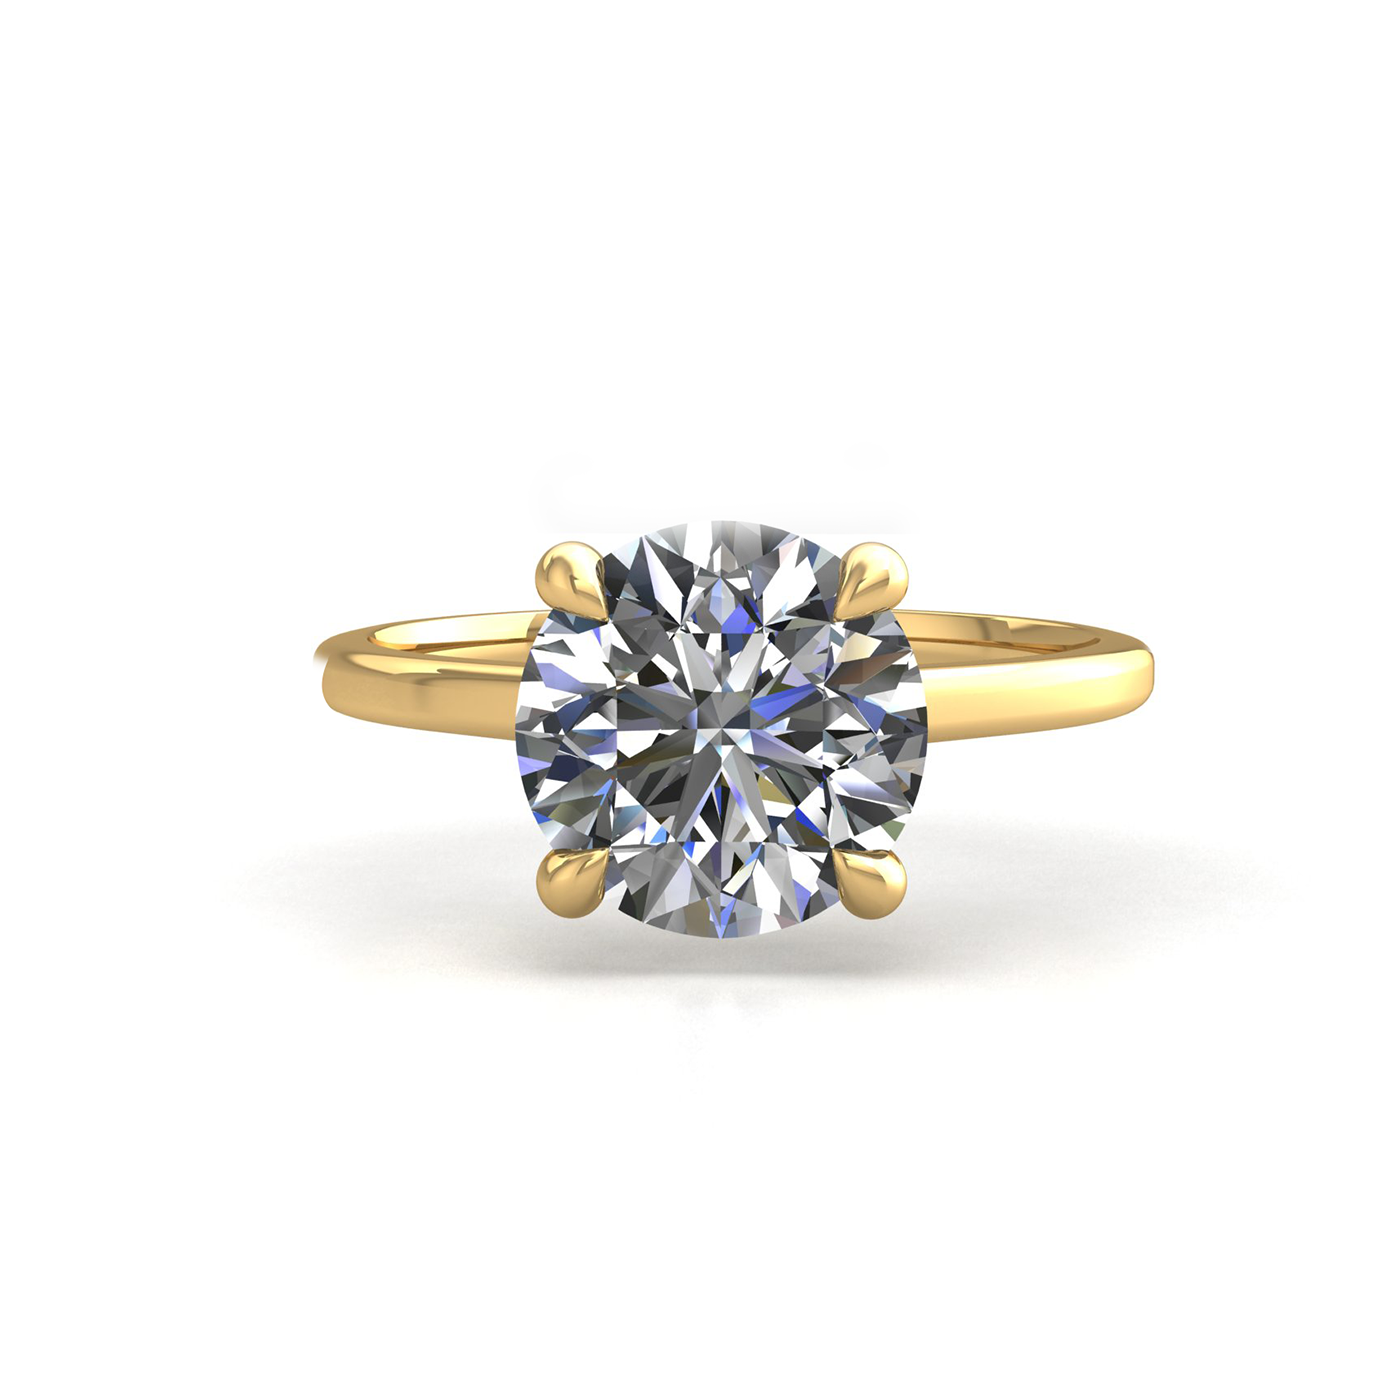 18k yellow gold 1.2ct 4 prongs solitaire round cut diamond engagement ring with whisper thin band Photos & images